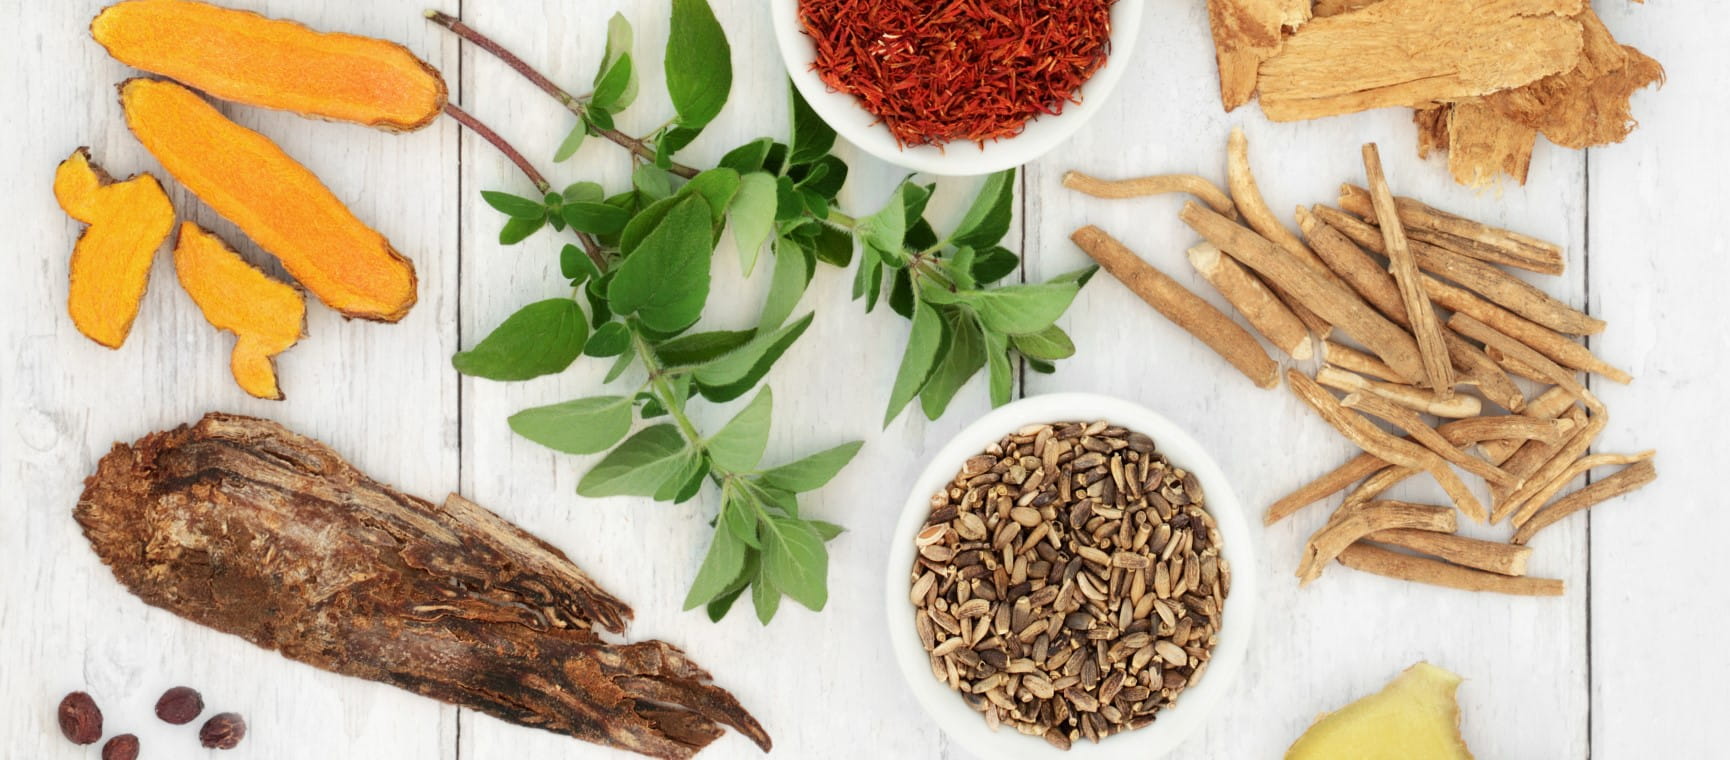 Herbal medicine preparation with fresh and dried herbs | Getty/marilyna